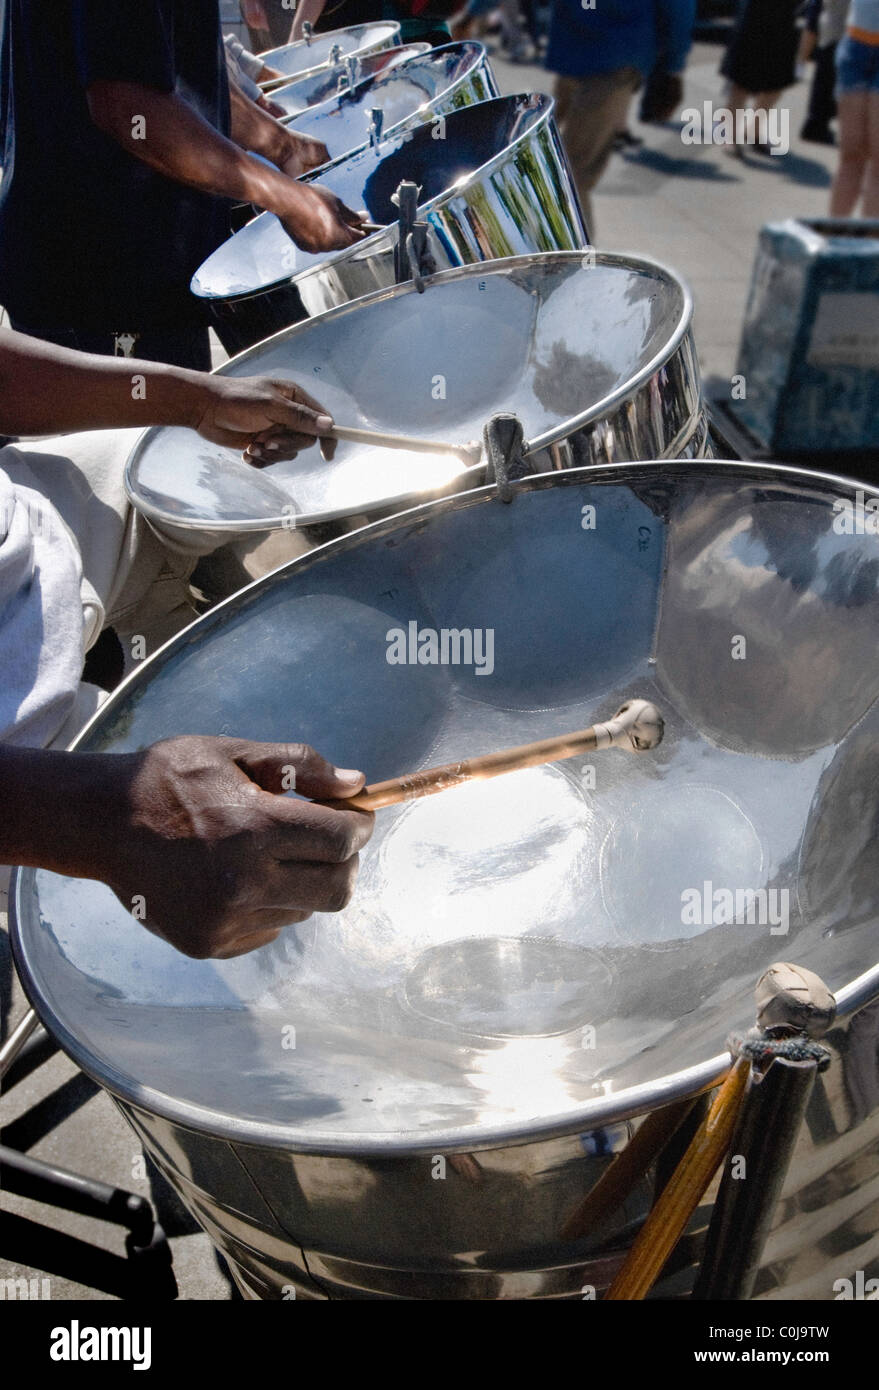 Steel drum band preforming at 'Pier 39' in San Francisco, California, USA Stock Photo